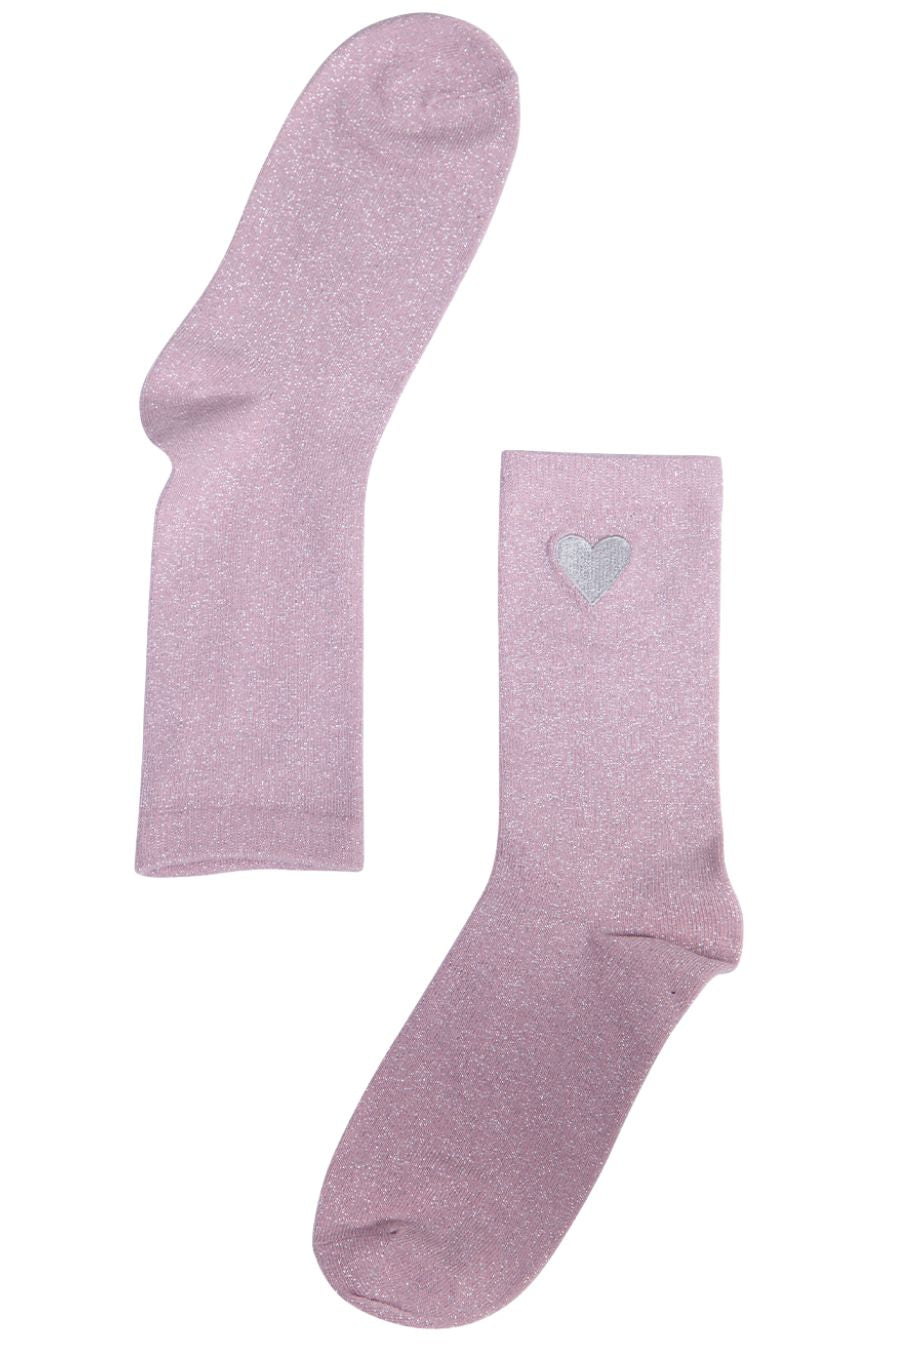 pink shimmery ankle socks with a silver emboidered heart